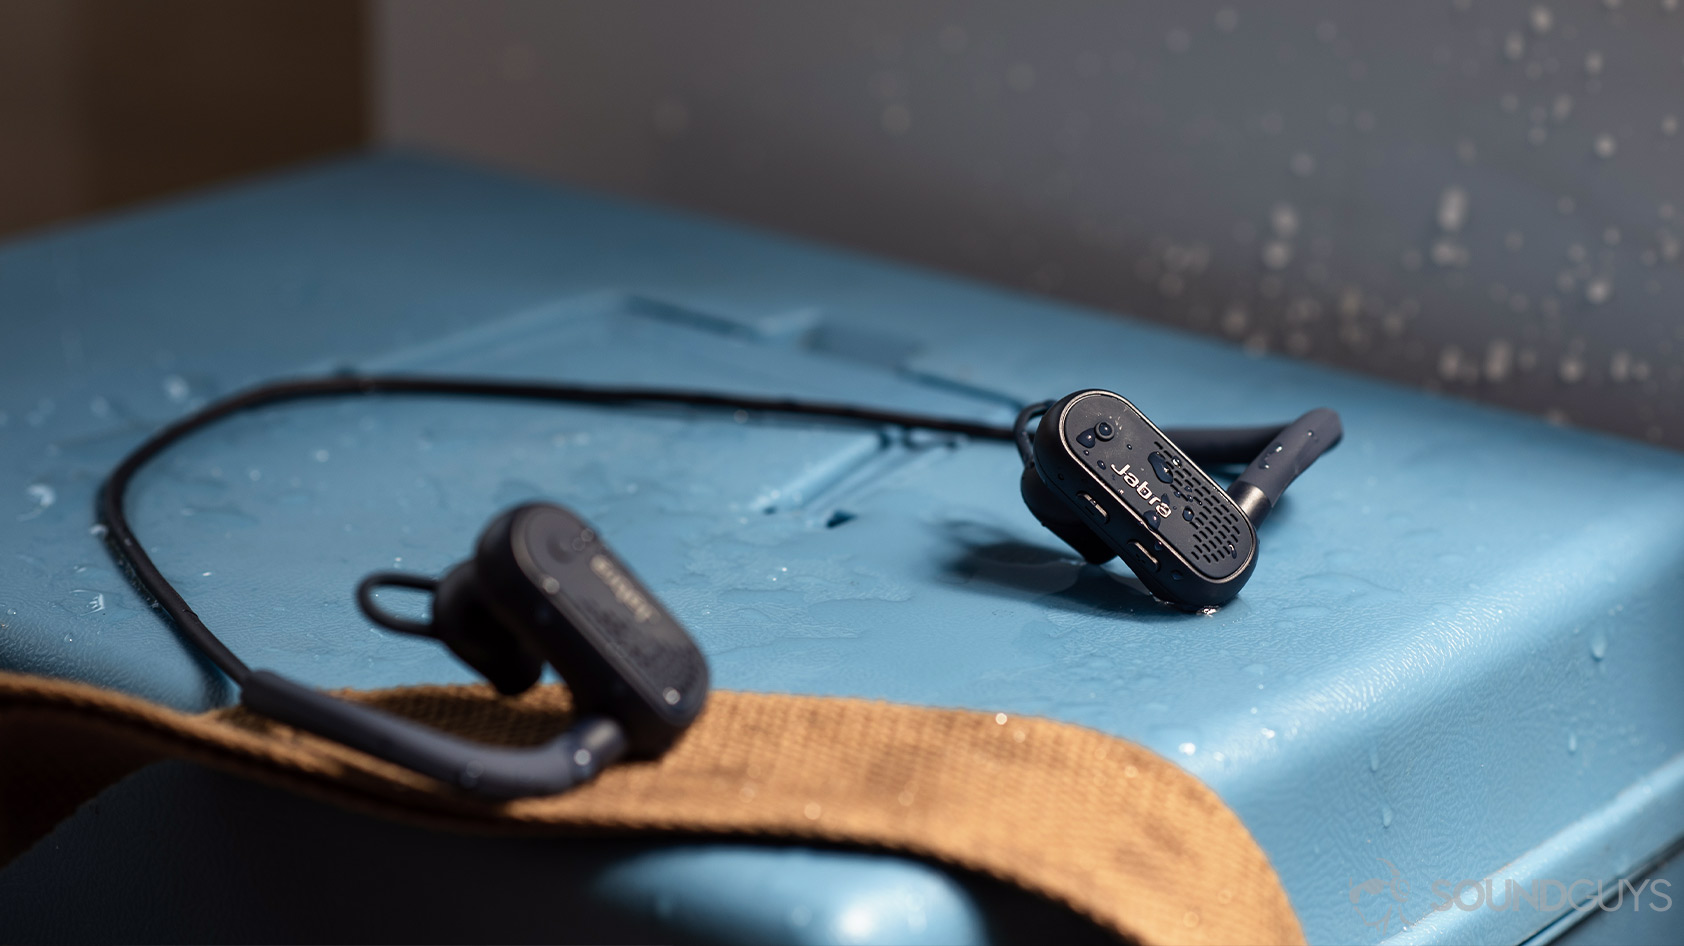 A picture of the Jabra Elite Active 45e neckband workout earbuds covered in water on a blue surface.